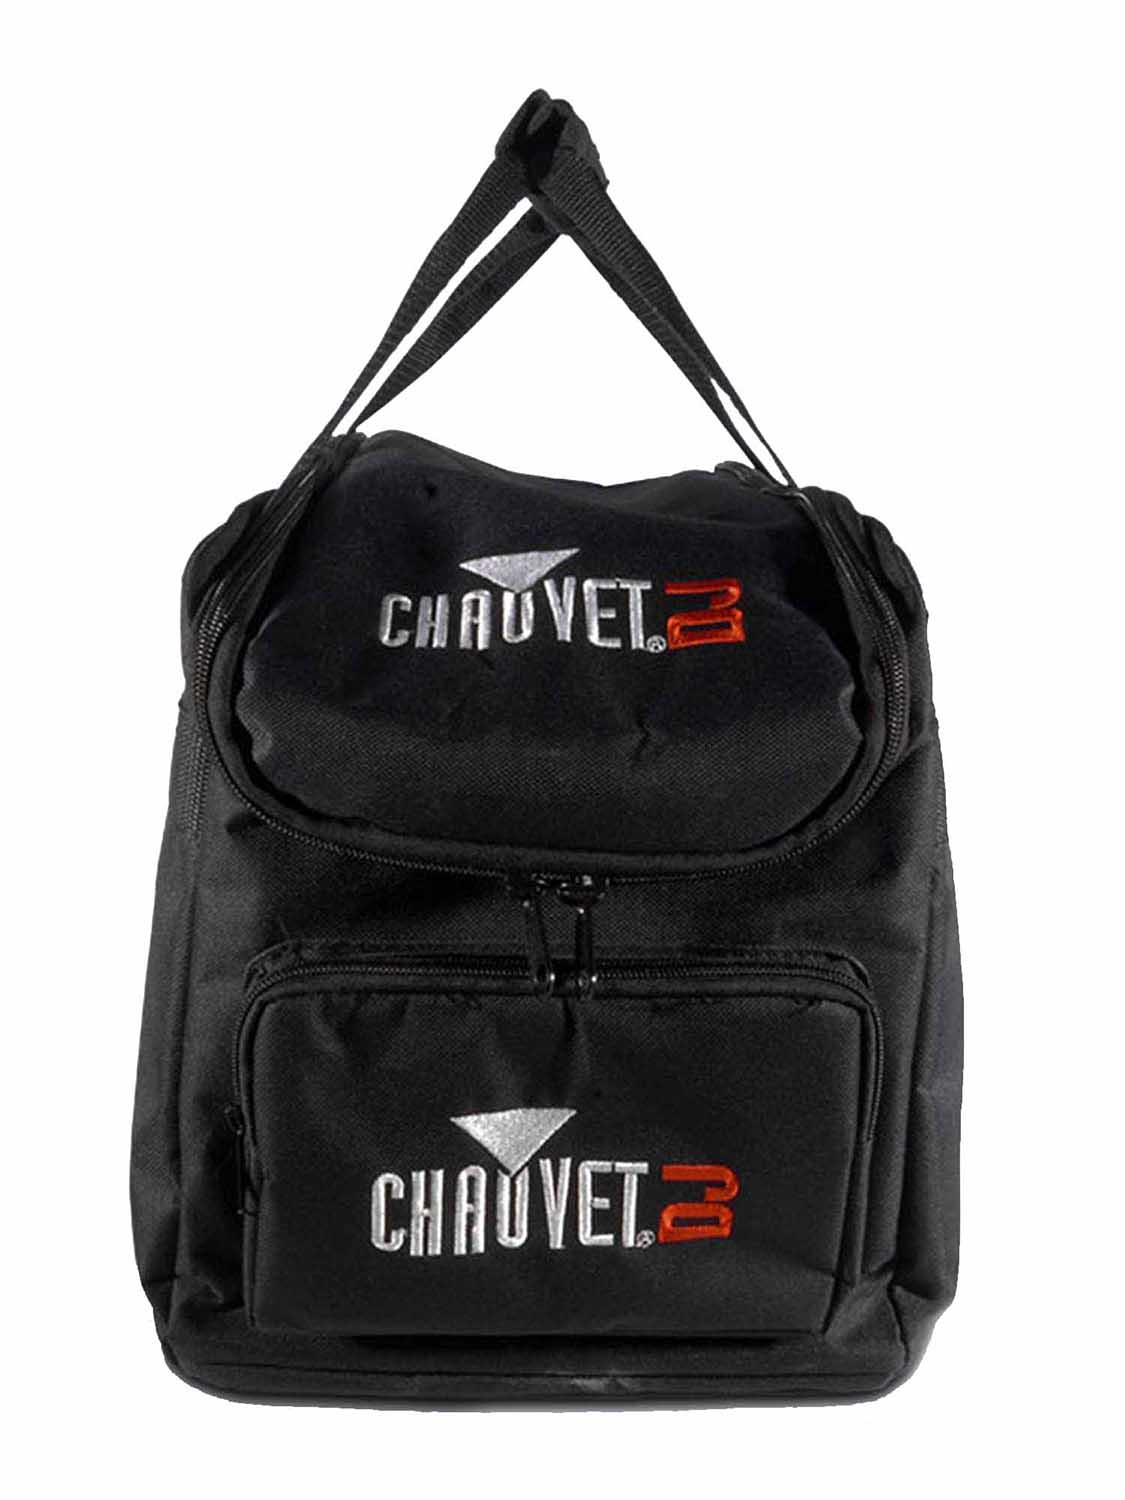 Chauvet DJ Package with 4 Intimidator Scan 360 LED Scanner and 4 CHS-30 VIP Gear Bag - Hollywood DJ